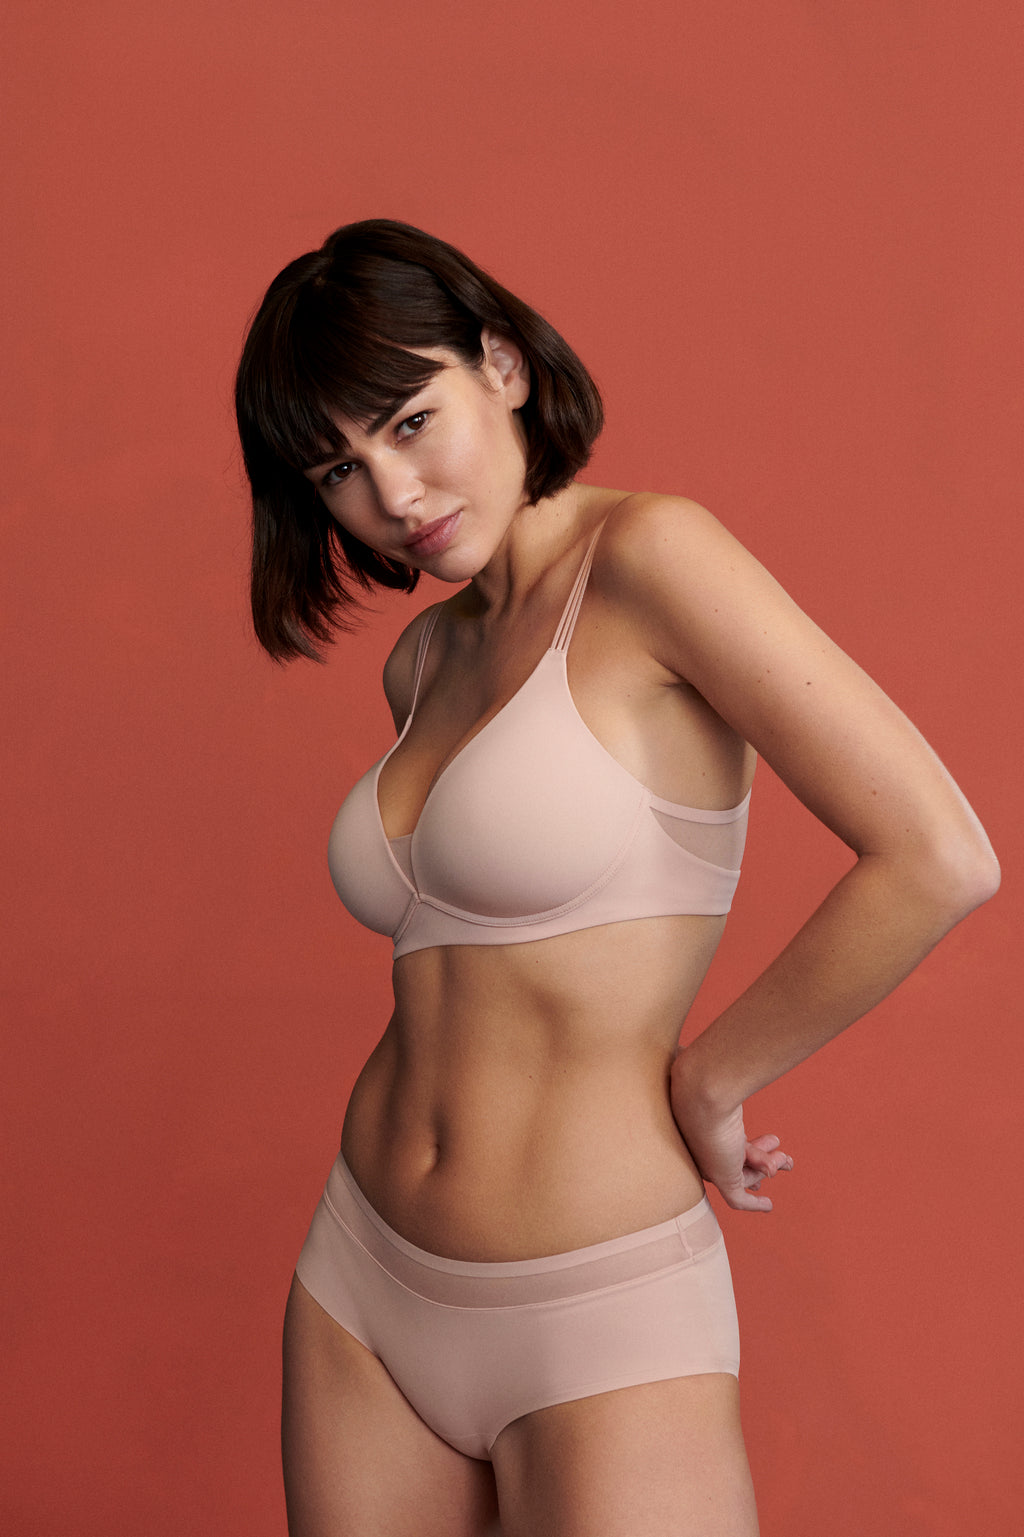 Marie Jo collection: elegant lingerie with a hint of lace